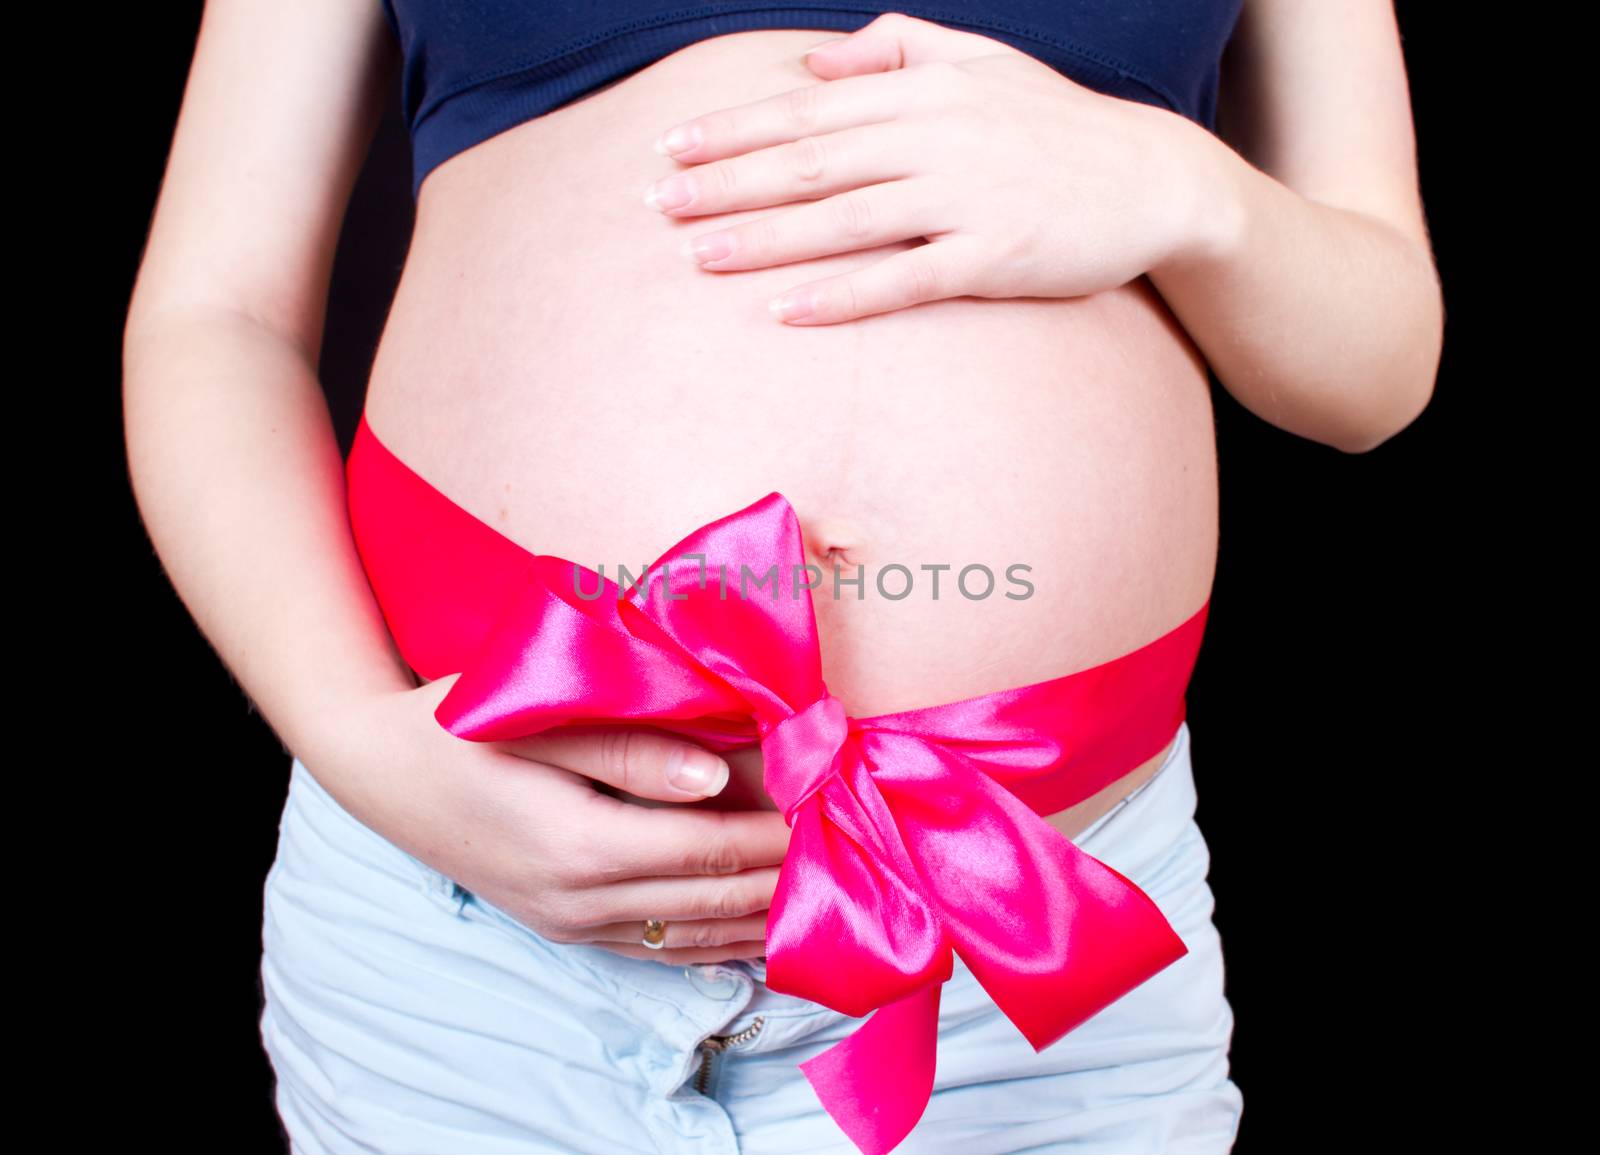 Pregnant belly tied with red satin ribbon